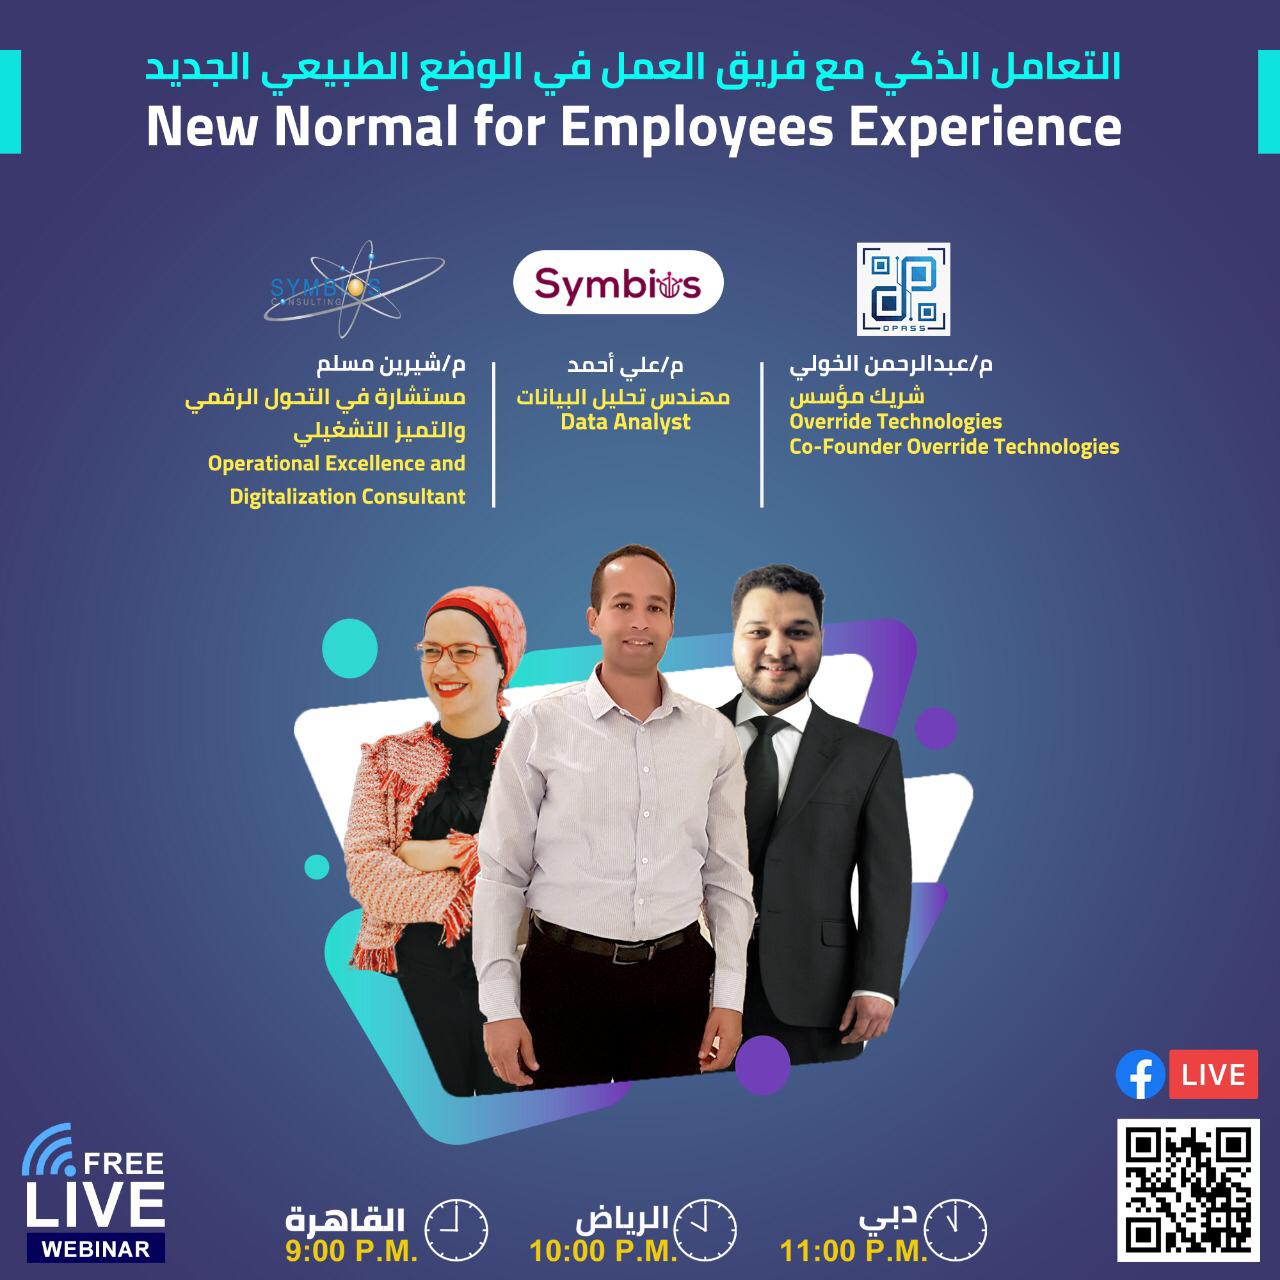 New Normal for Employees Experience